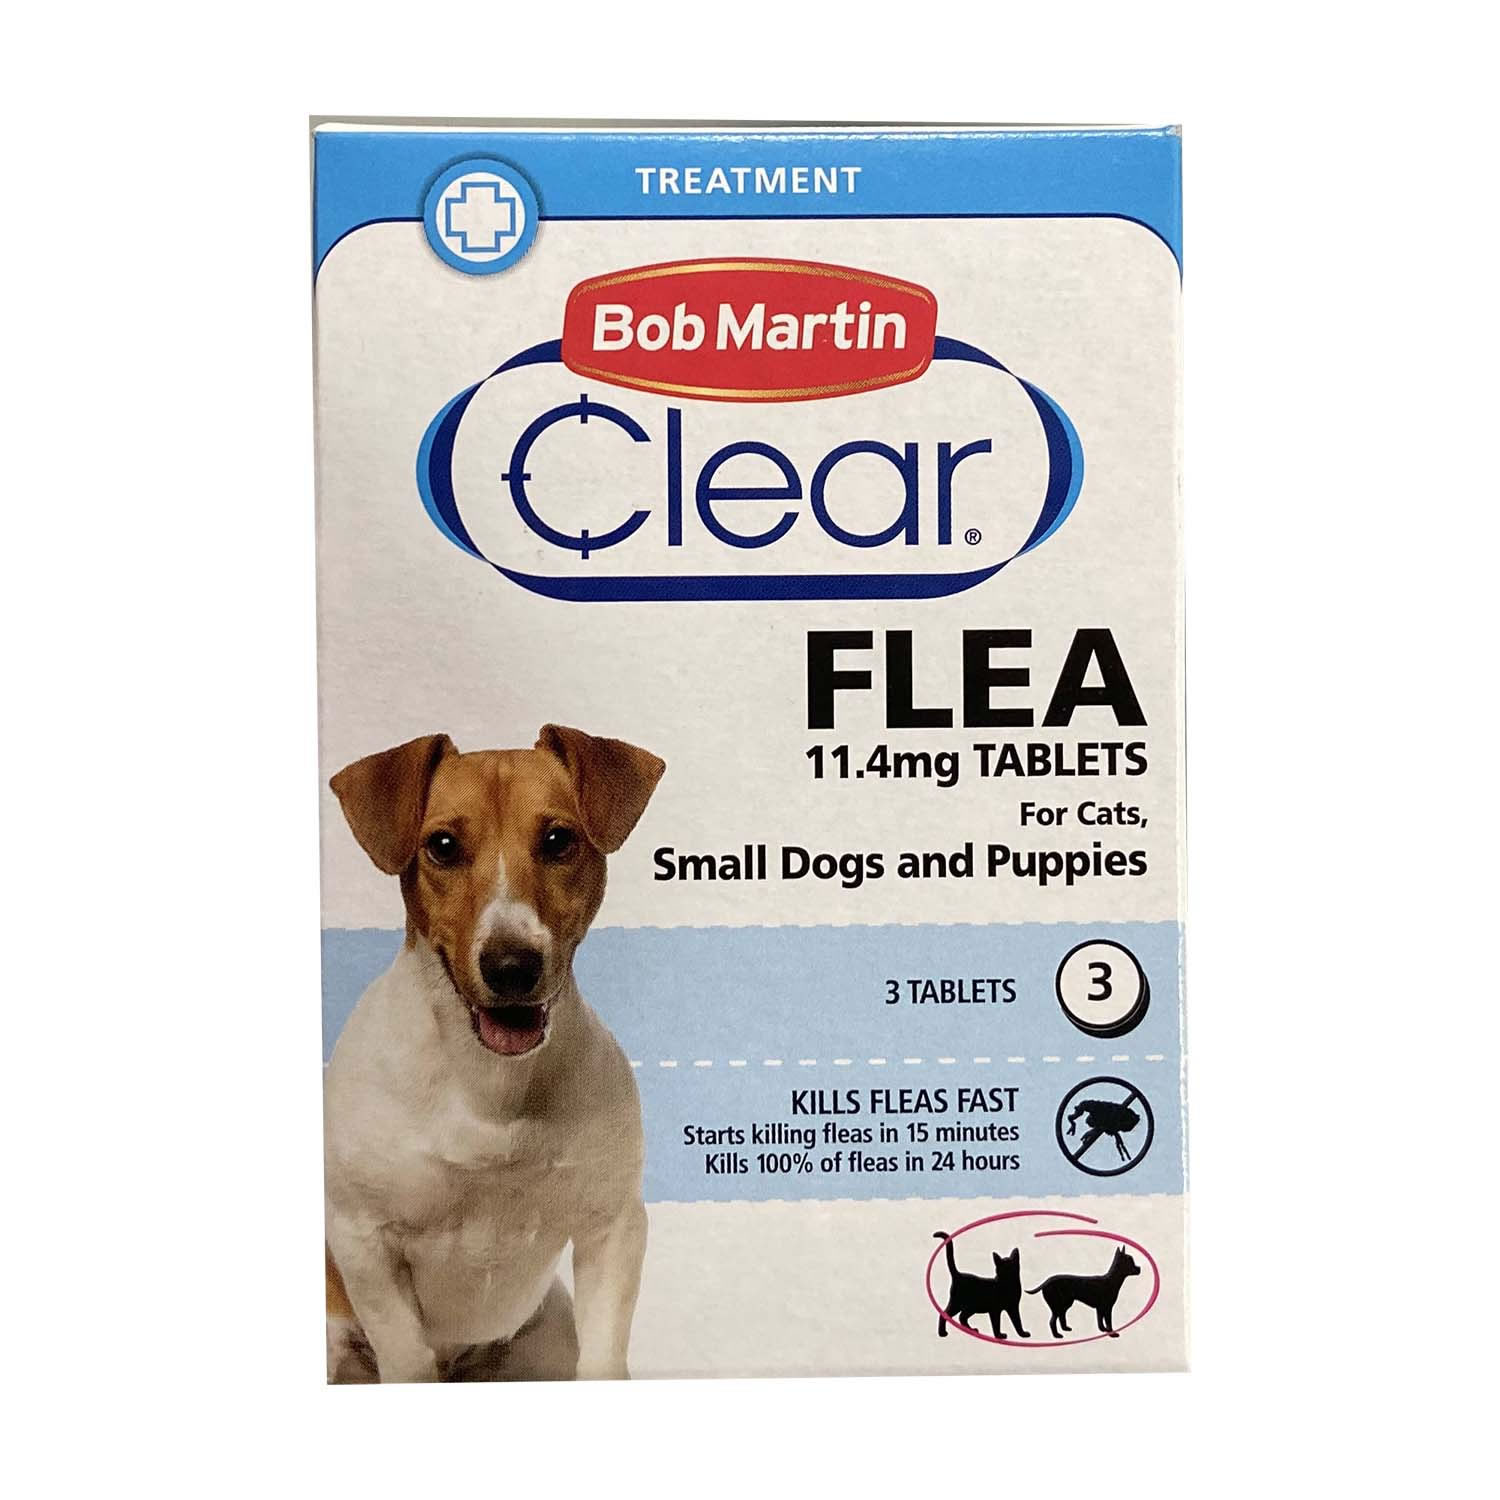 BOB MARTIN CLEAR FLEA TABLETS FOR SMALL DOGS & PUPPIES BOB MARTIN CLEAR FLEA TABLETS FOR SMALL DOGS & PUPPIES 3 PACK  3 PACK